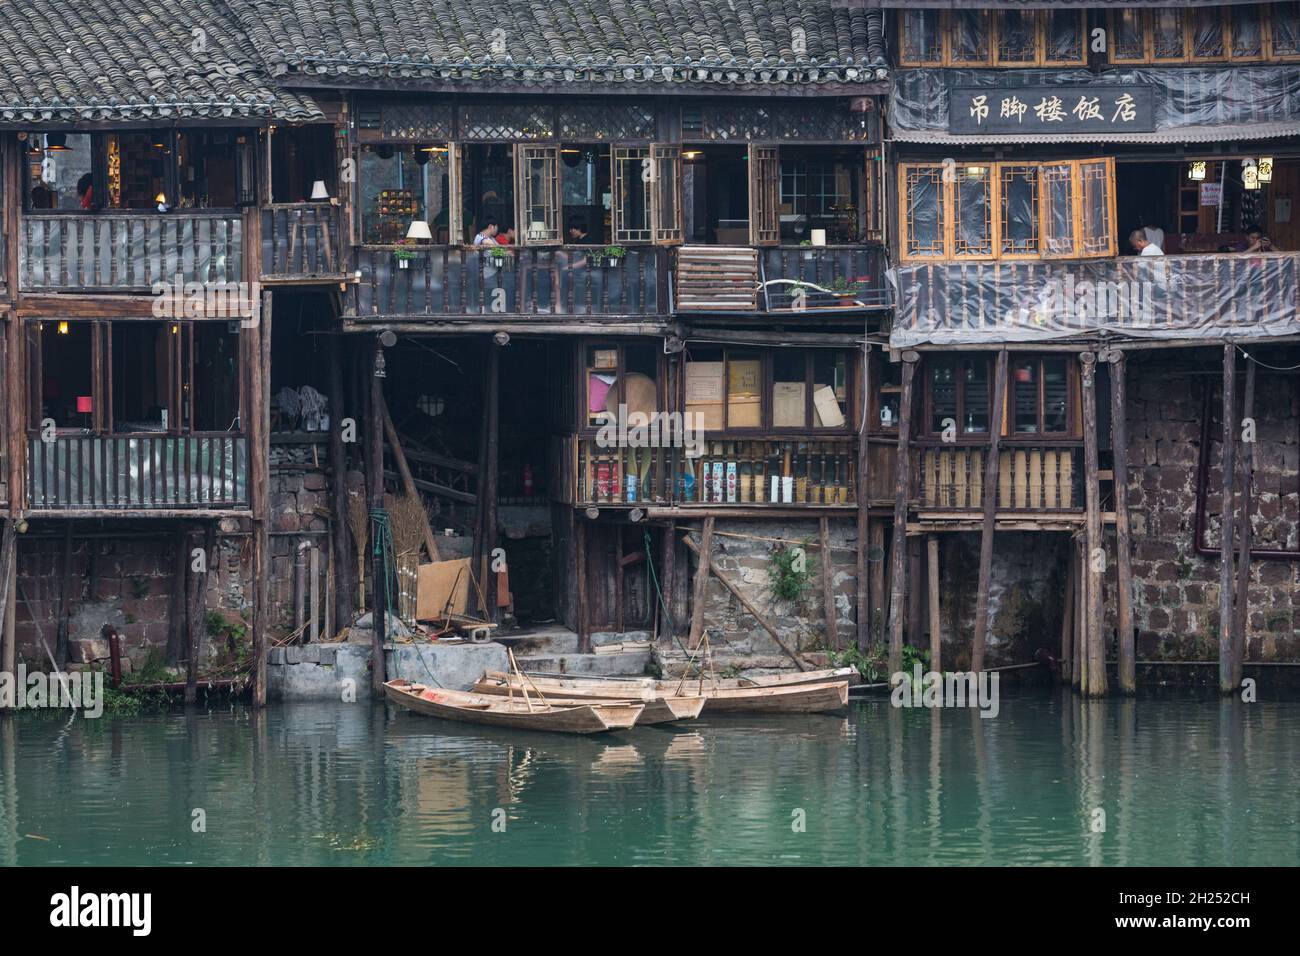 Sampans docked in front Diaojiao-style buildings along the Tuojiang River, Fenghuang, China. Stock Photo